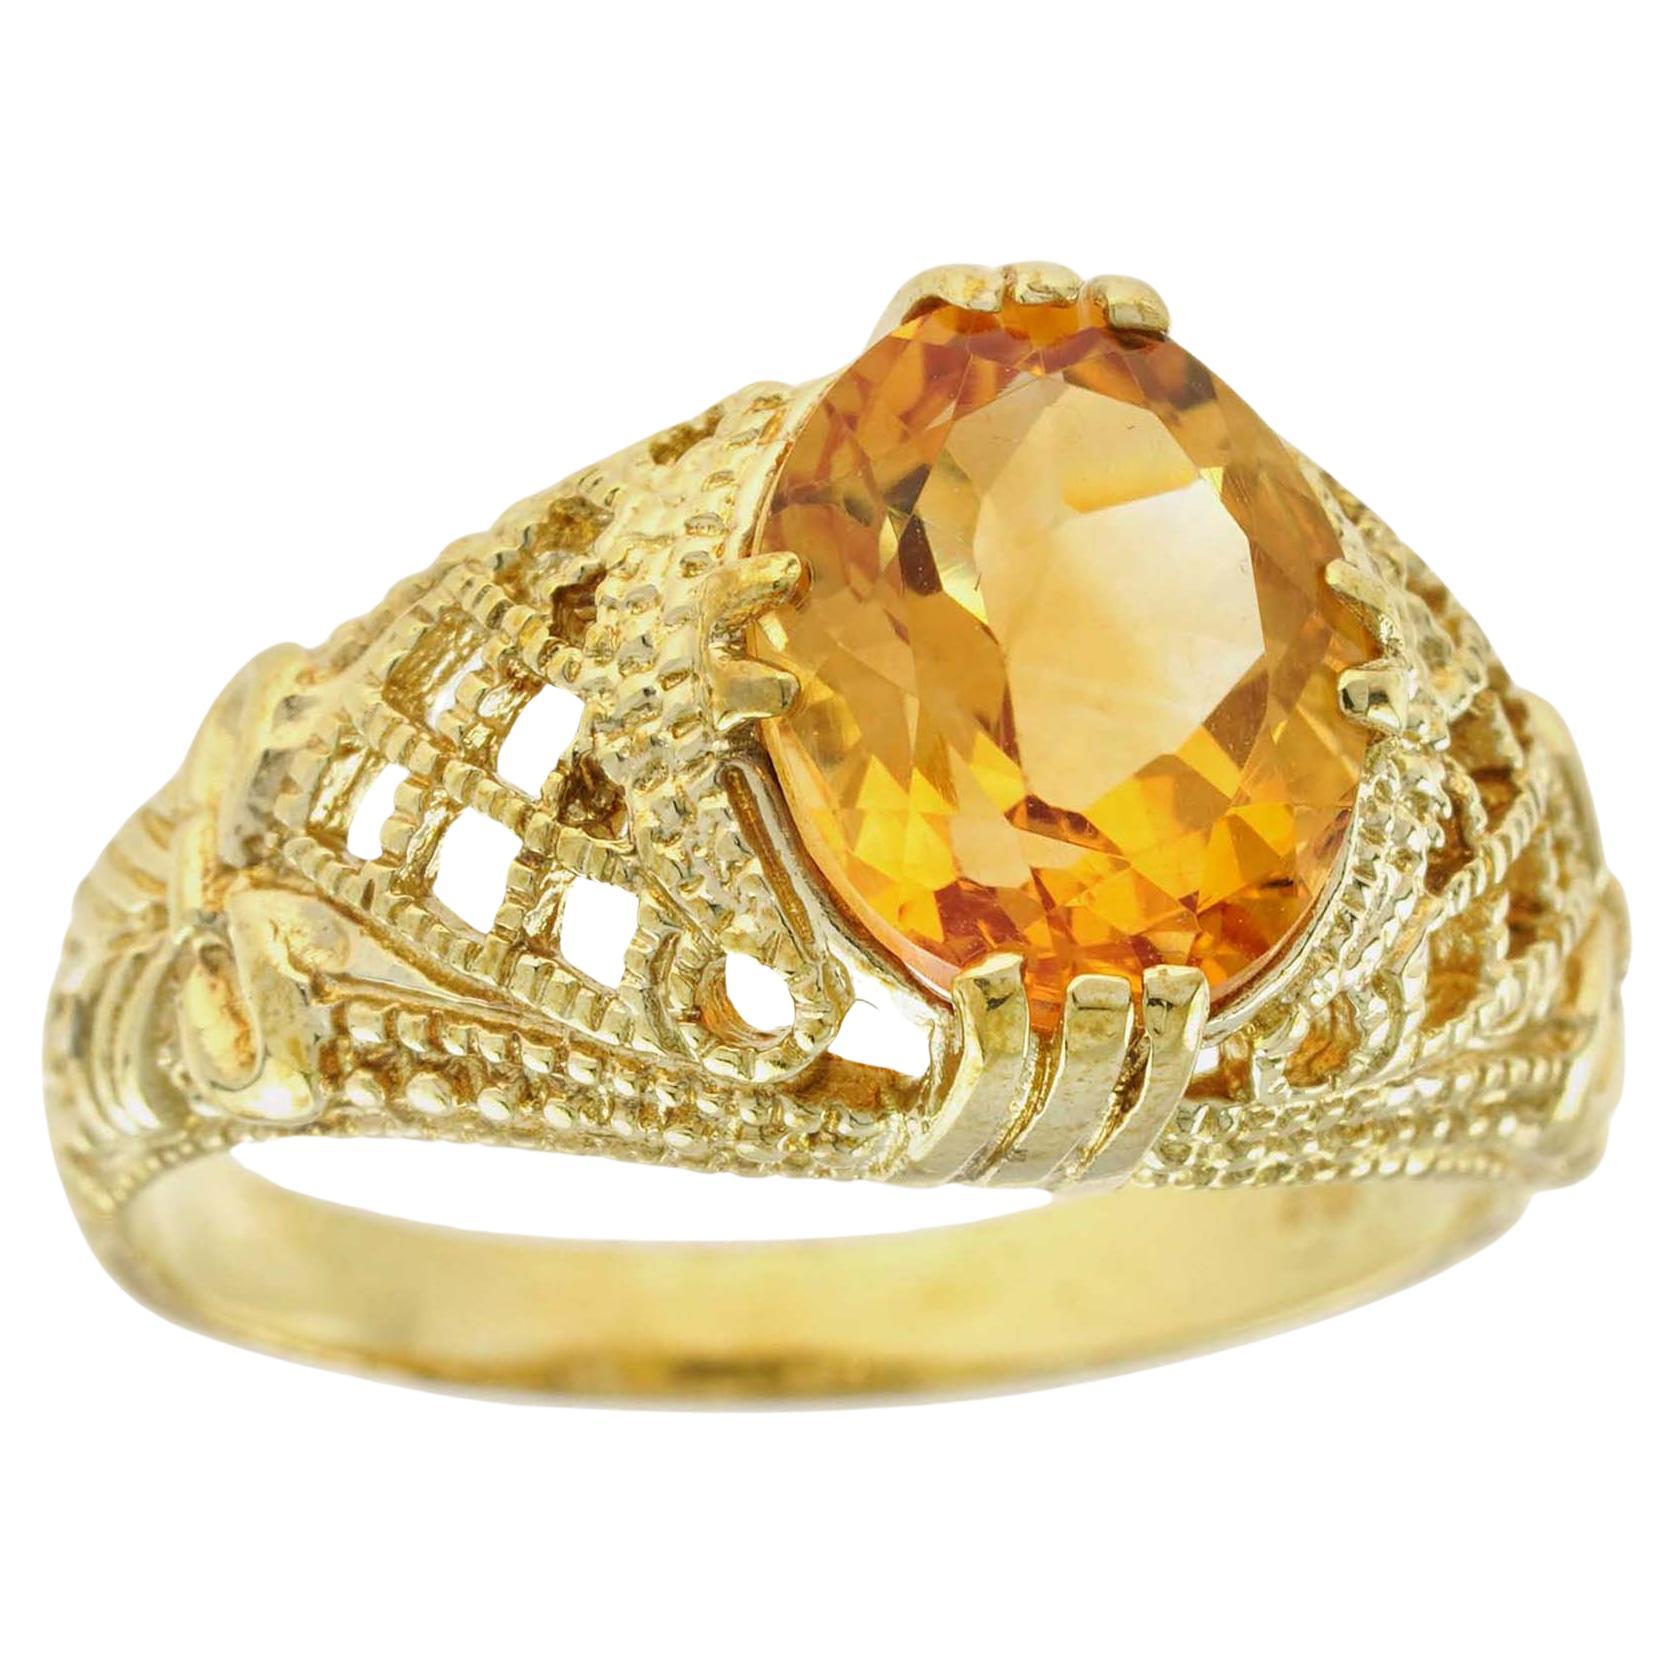 For Sale:  Natural Citrine Vintage Style Filigree Cocktail Ring in 9K Yellow Gold